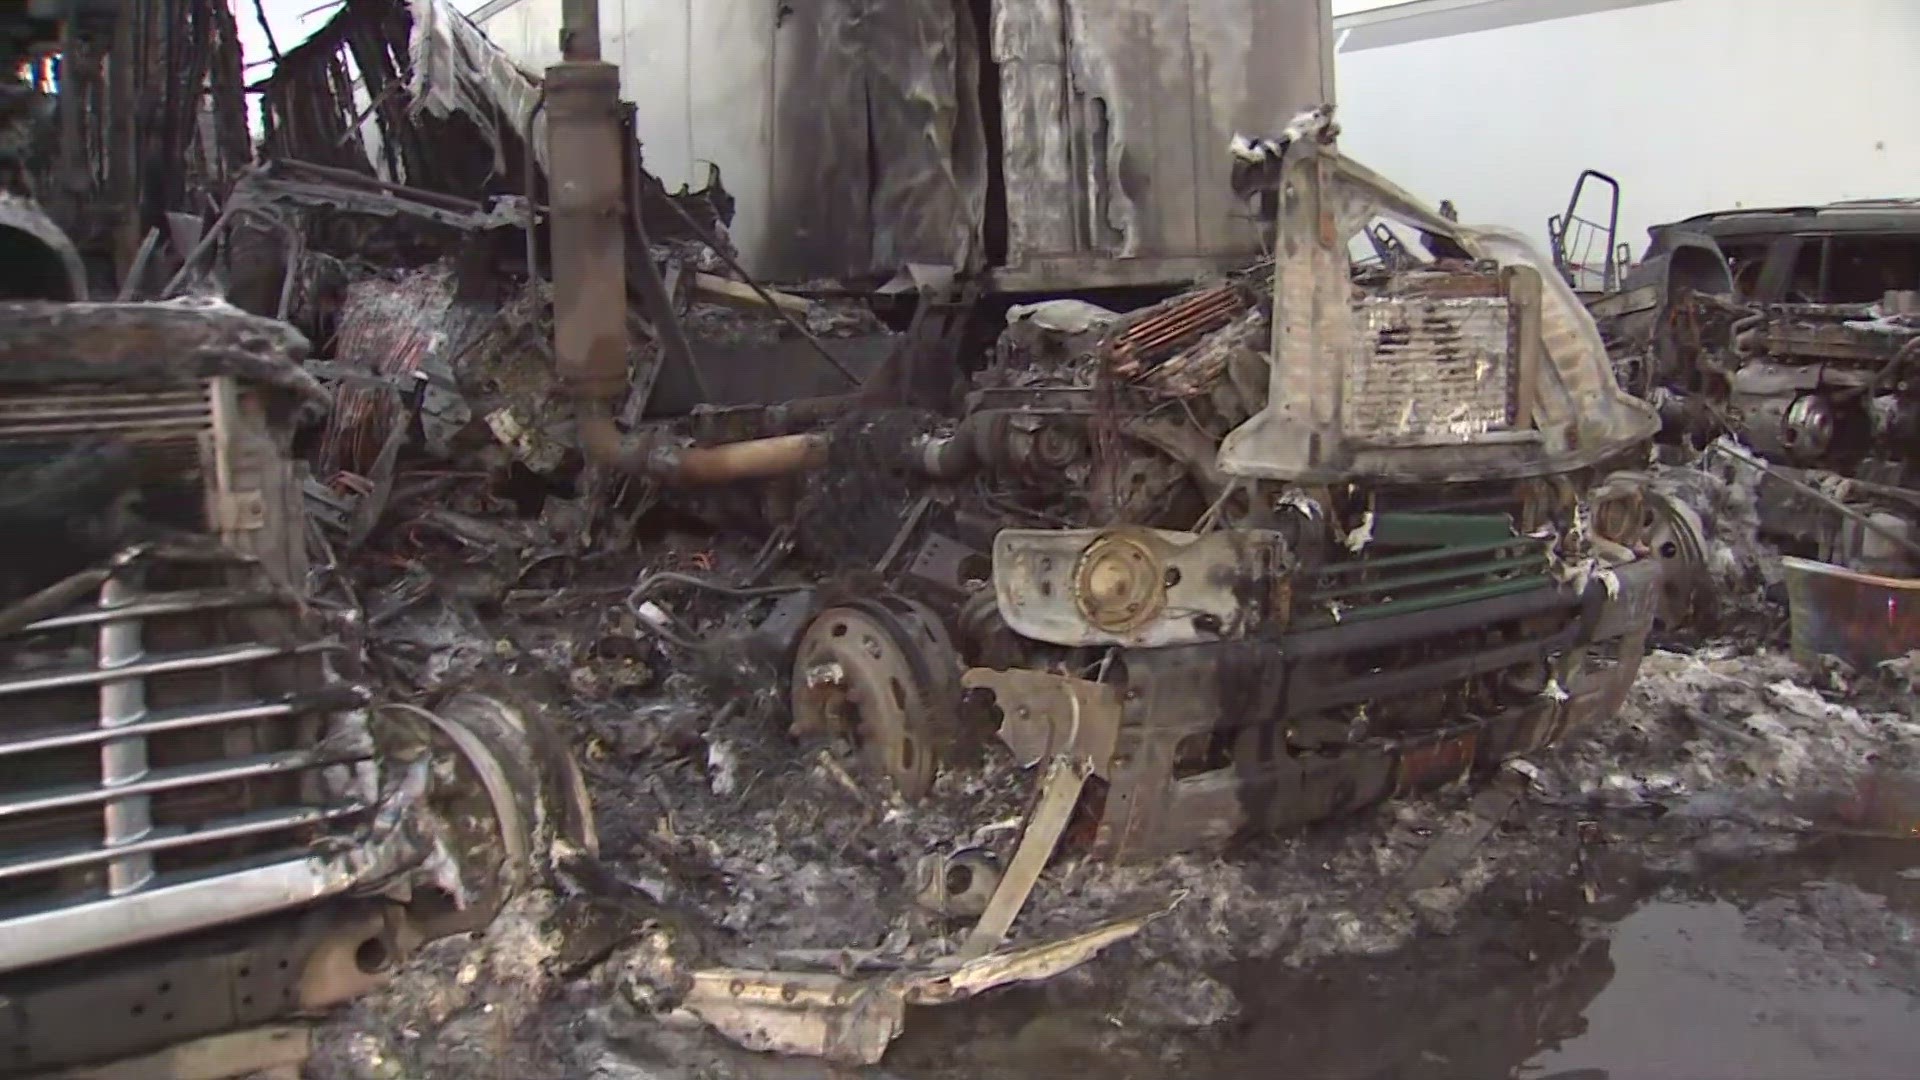 Tacoma fire officials are investigating after three semi-trucks caught on fire early Friday morning.